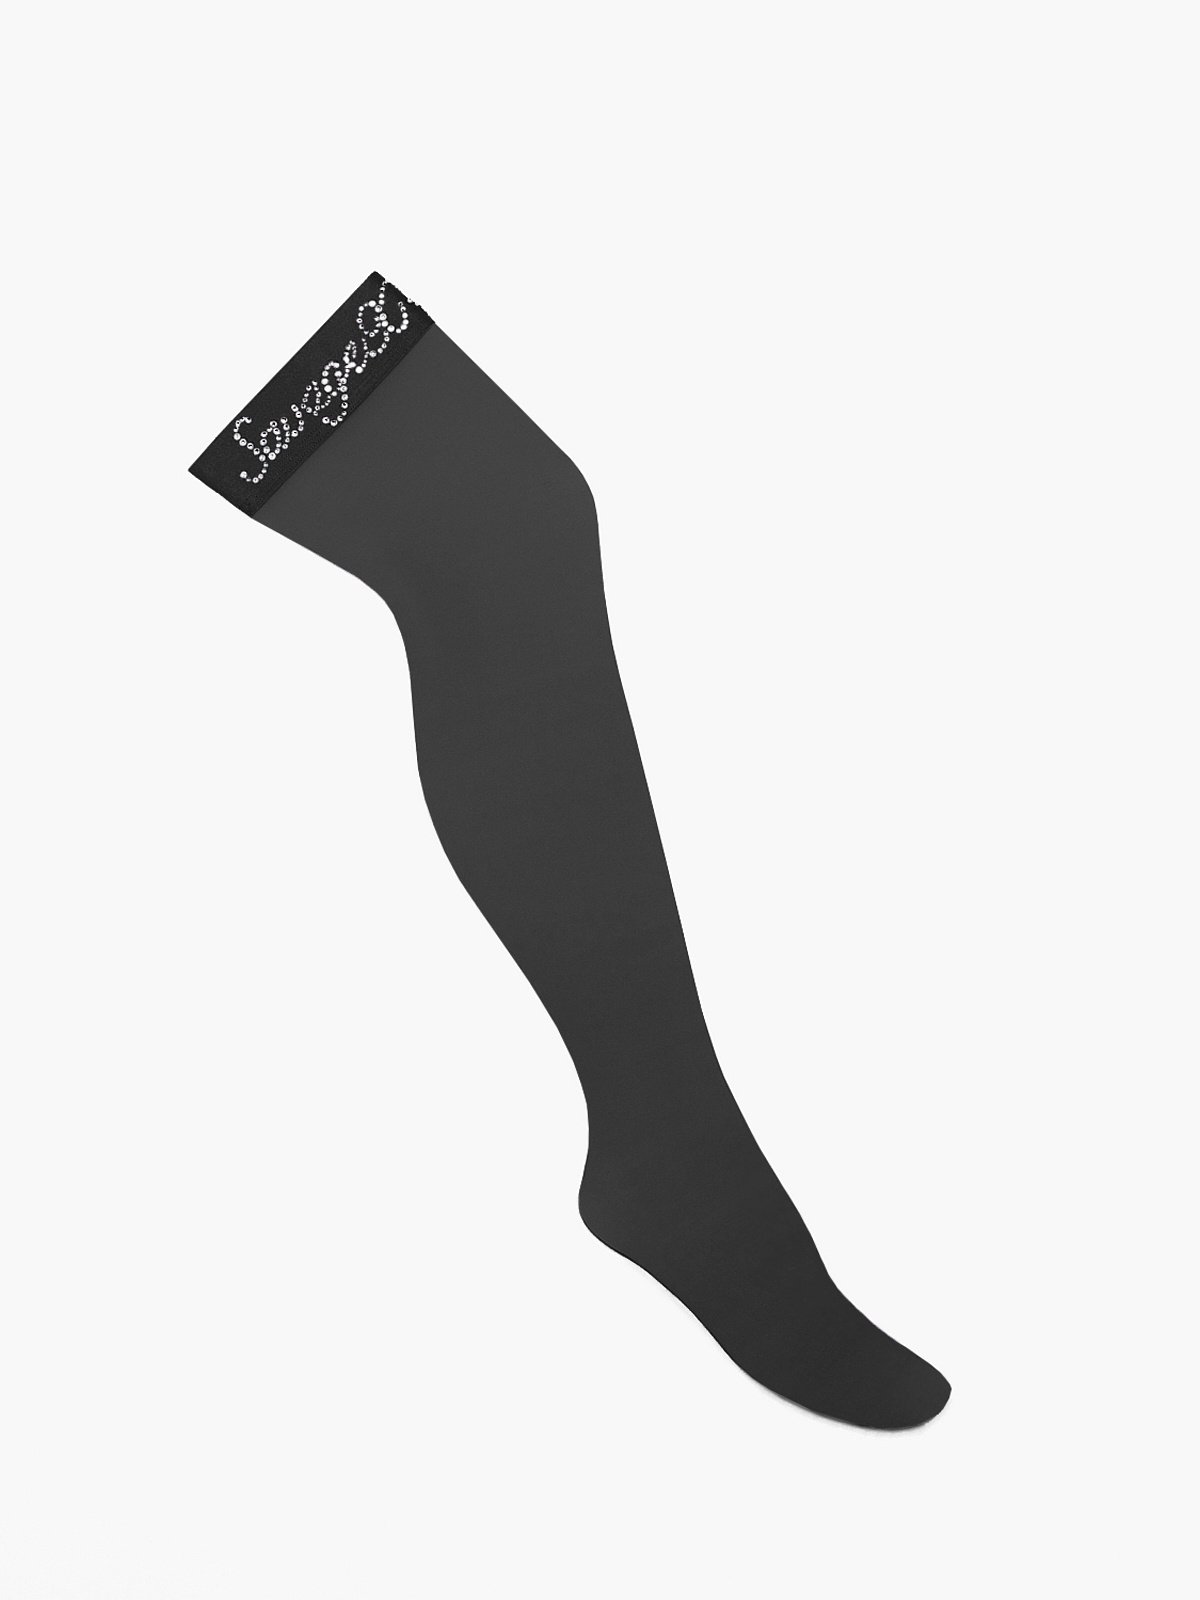 Divorce Court Thigh-High Stay-Up Stockings